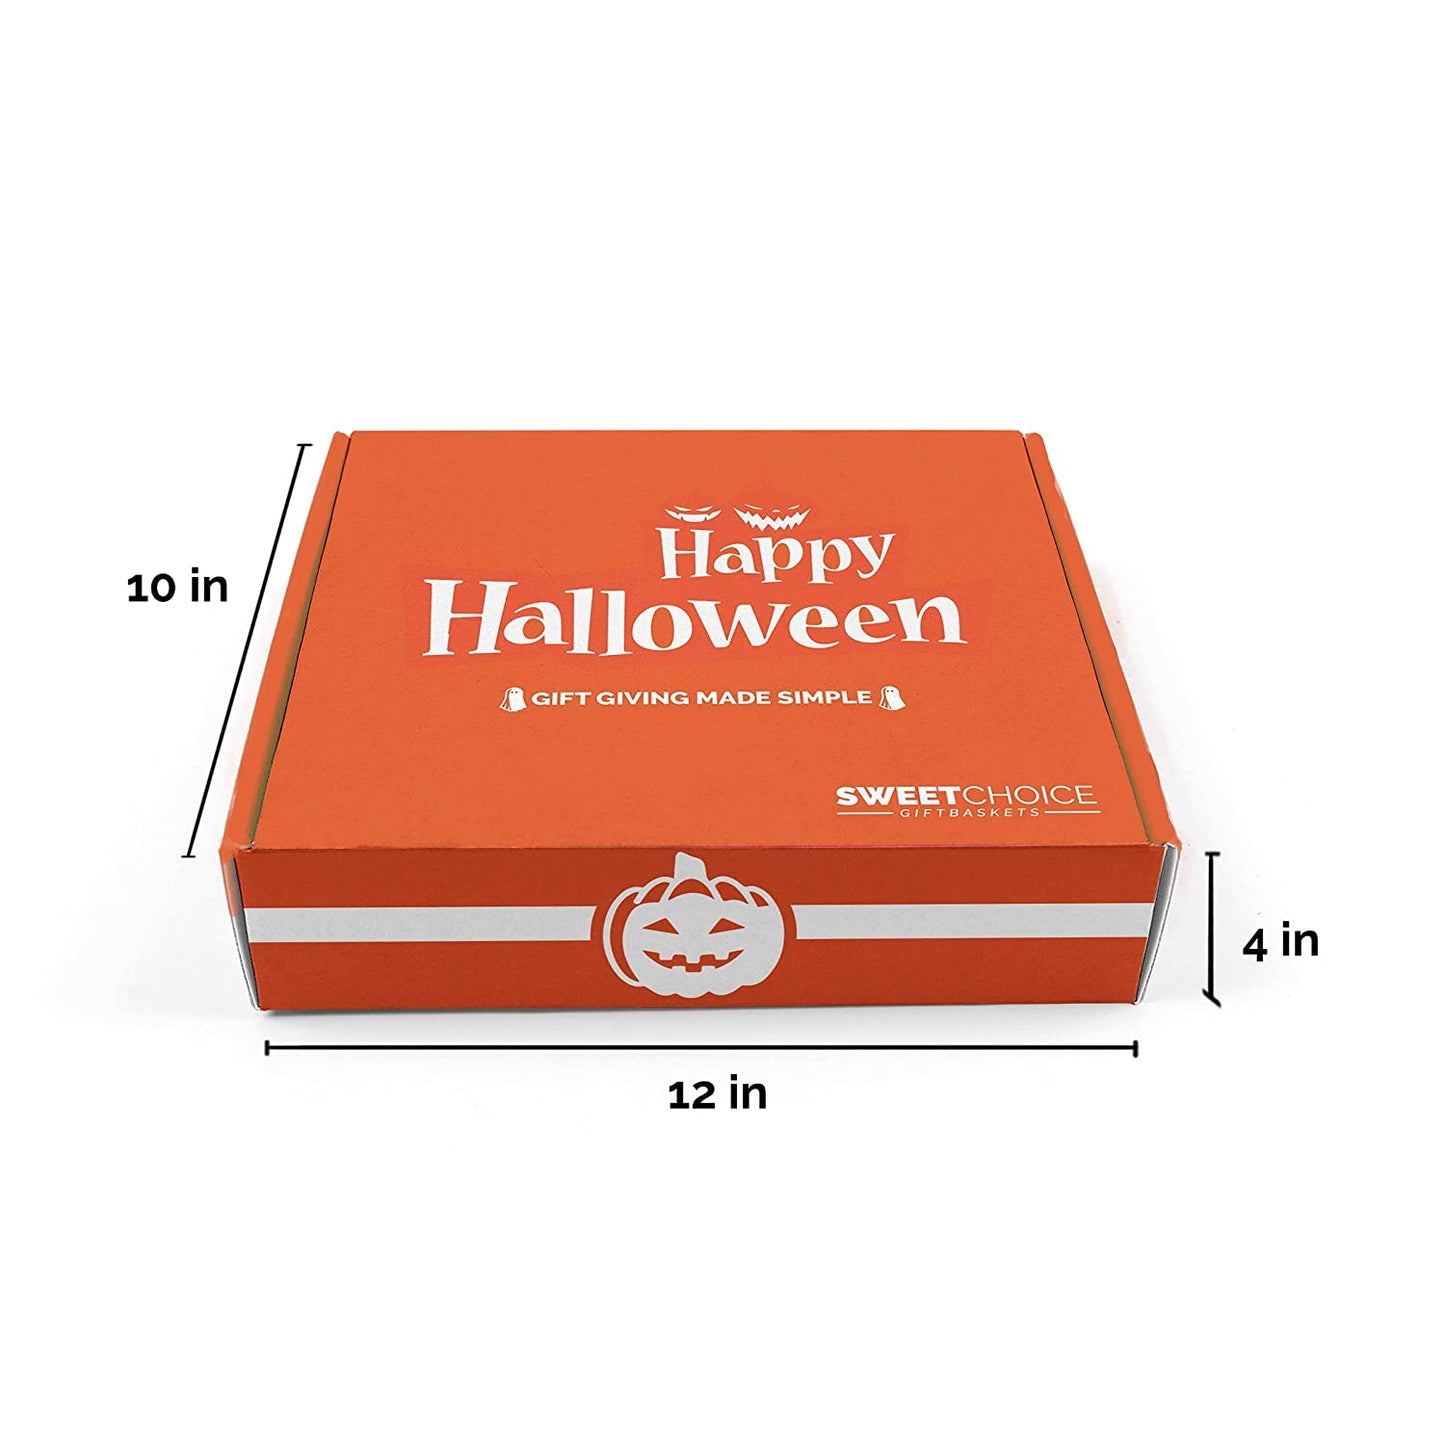 Halloween Care Package Snack box (45) Candy Snacks Assortment Trick or Treat Cookies Food Bars Toys Variety Gift Pack Box Bundle Mixed Bulk Sampler for Children Kids Boys Girls College Students Office